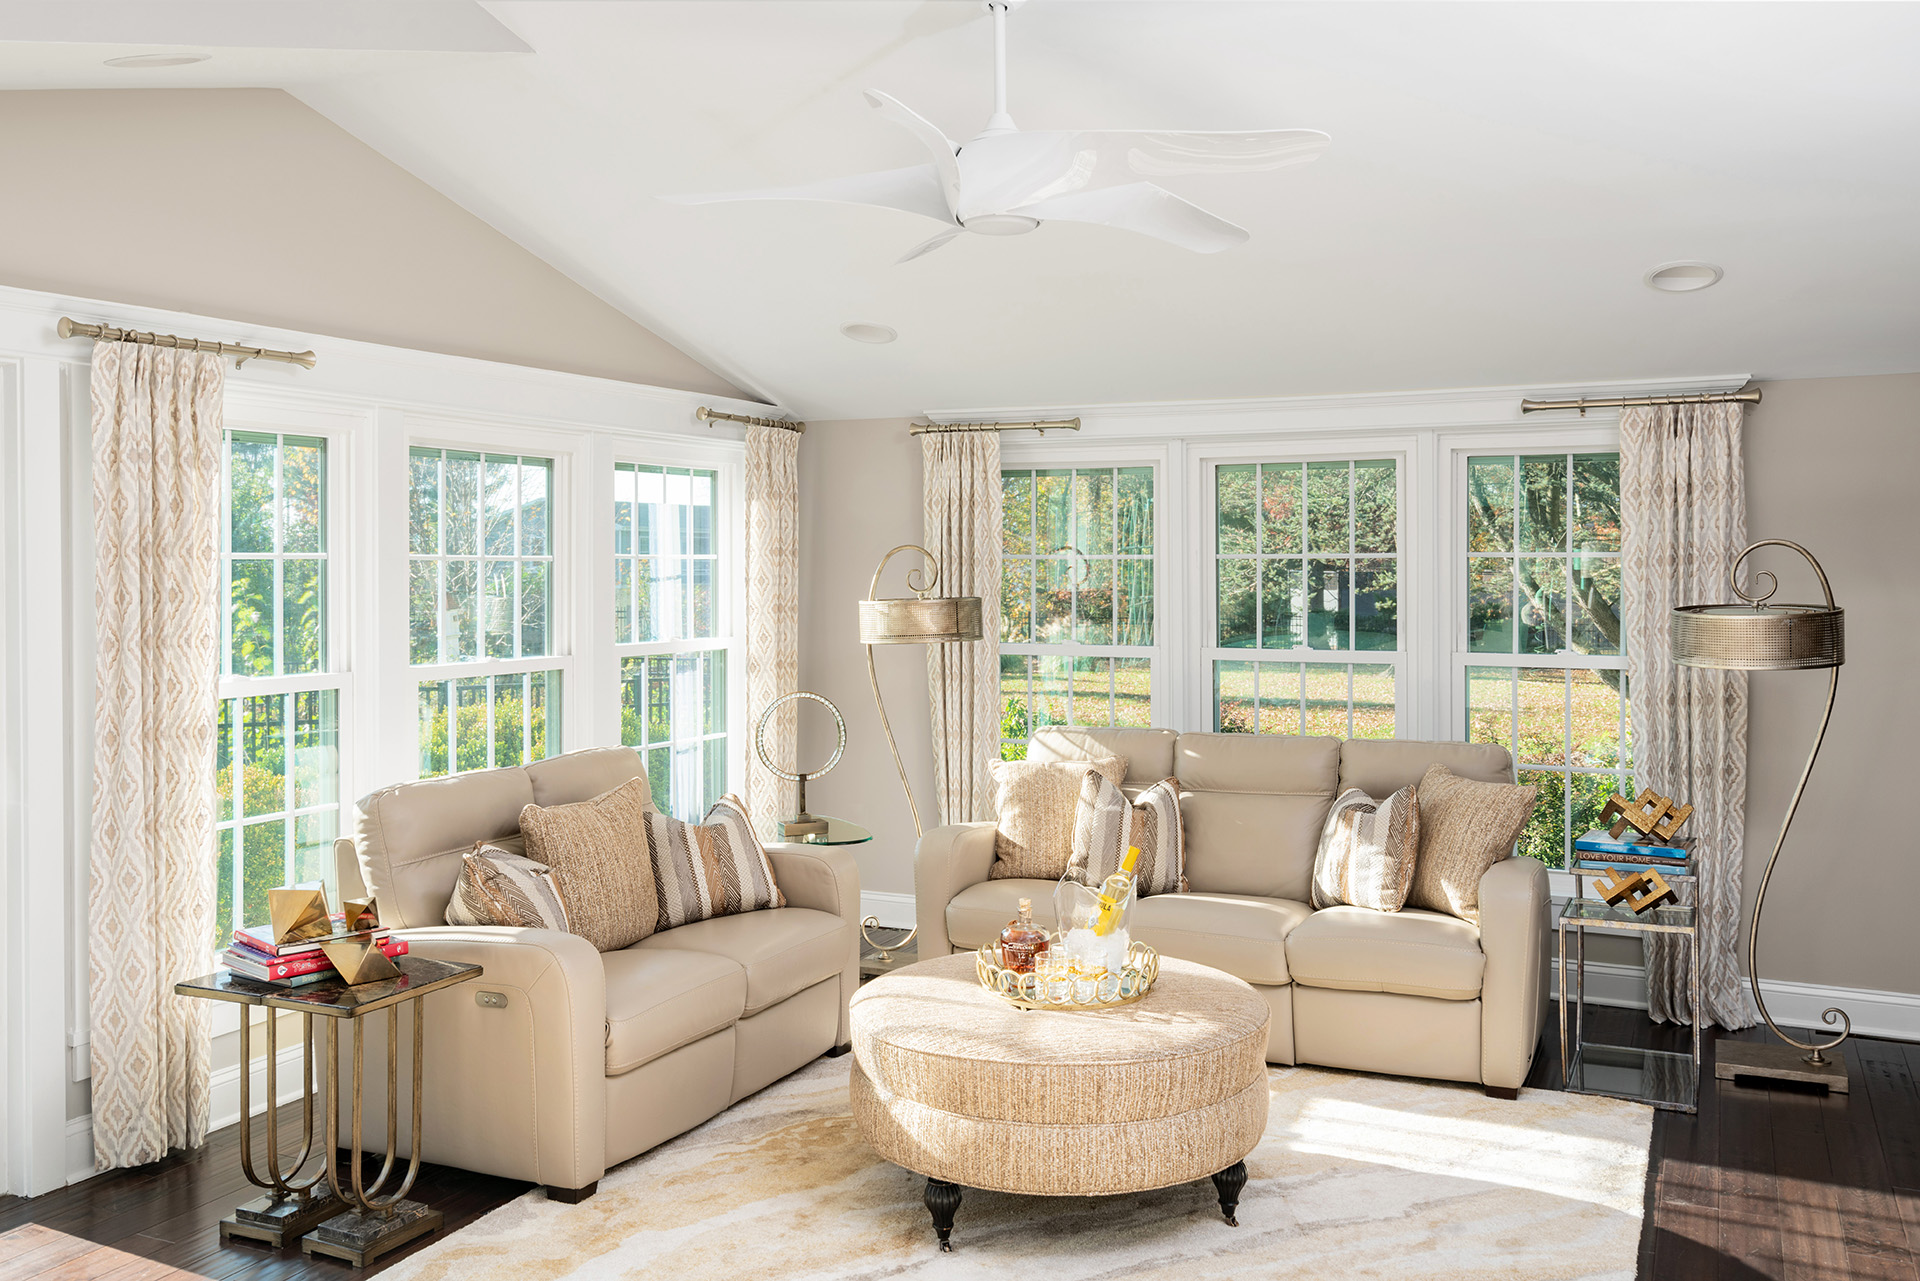 7 Ways to Refresh Your Window Treatments